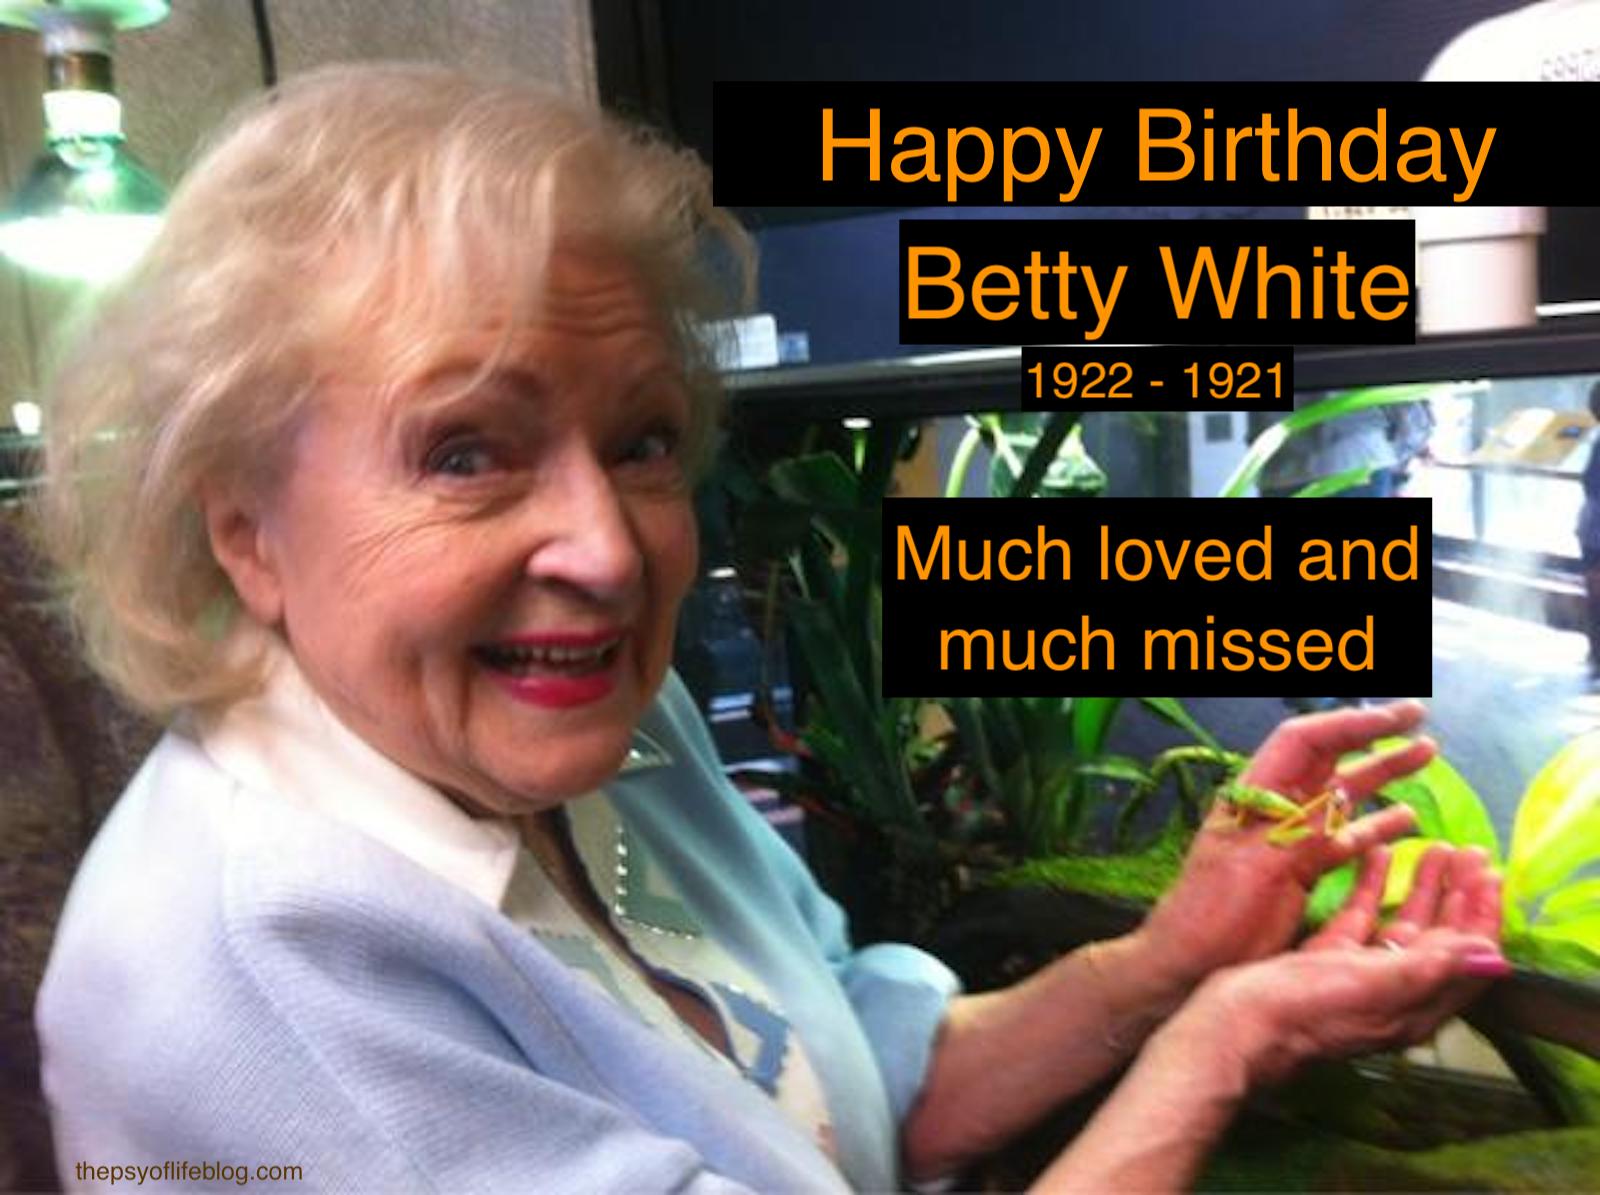 Betty White would've been 100 years old on 17 January.